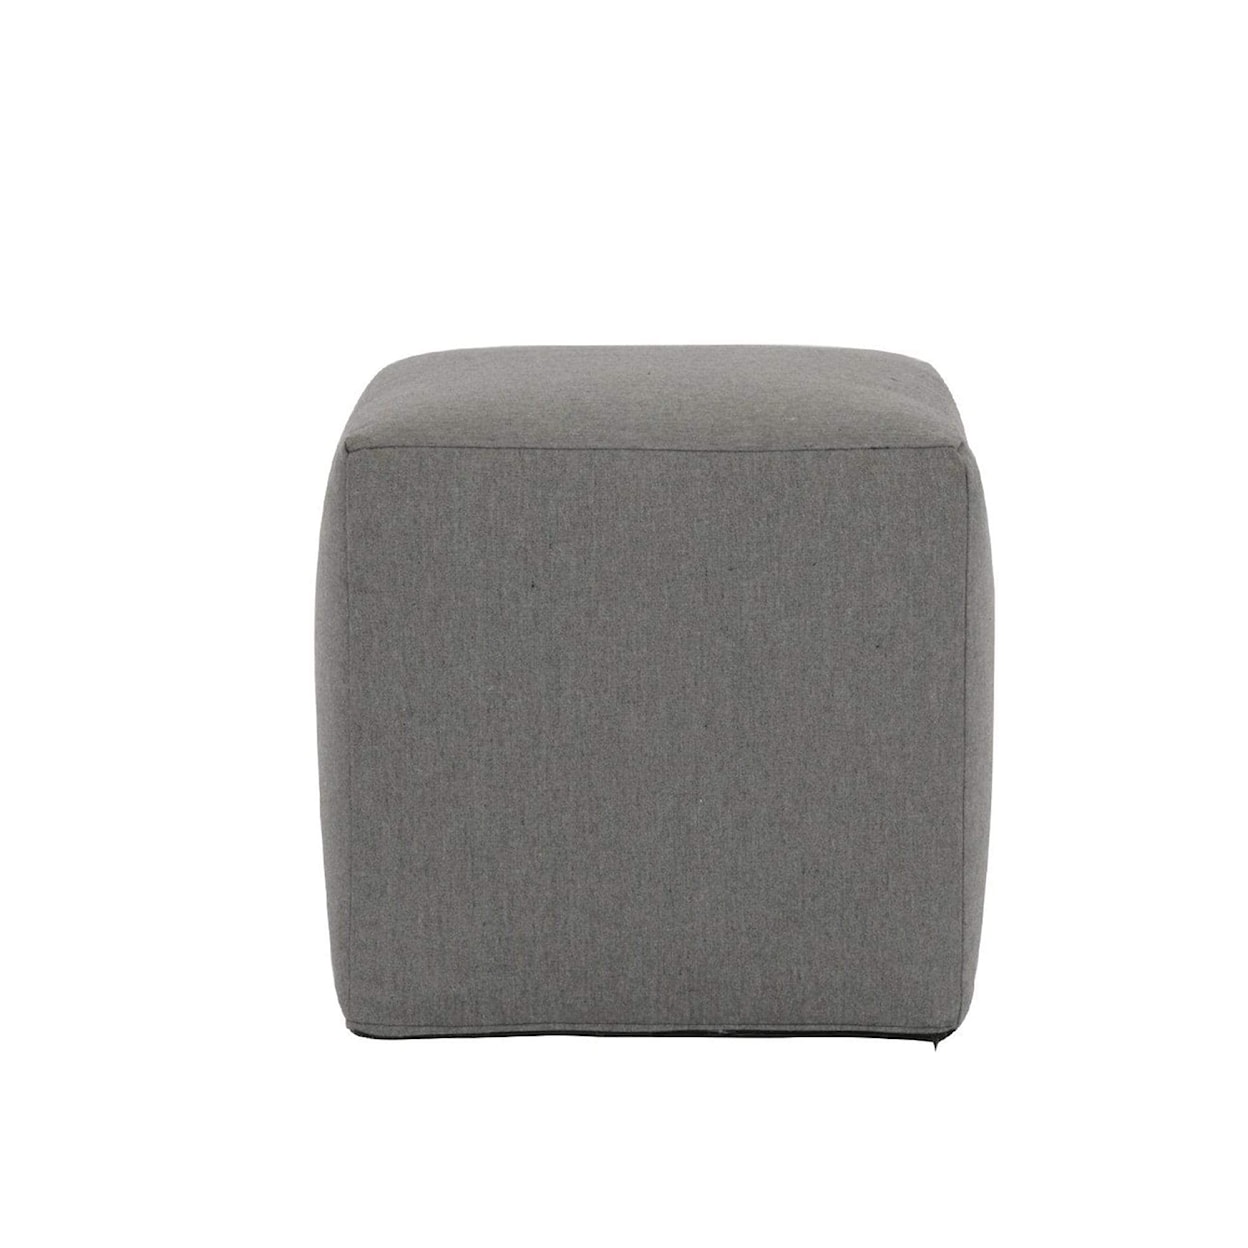 Sunset West The Bazaar Outdoor Square Ottoman